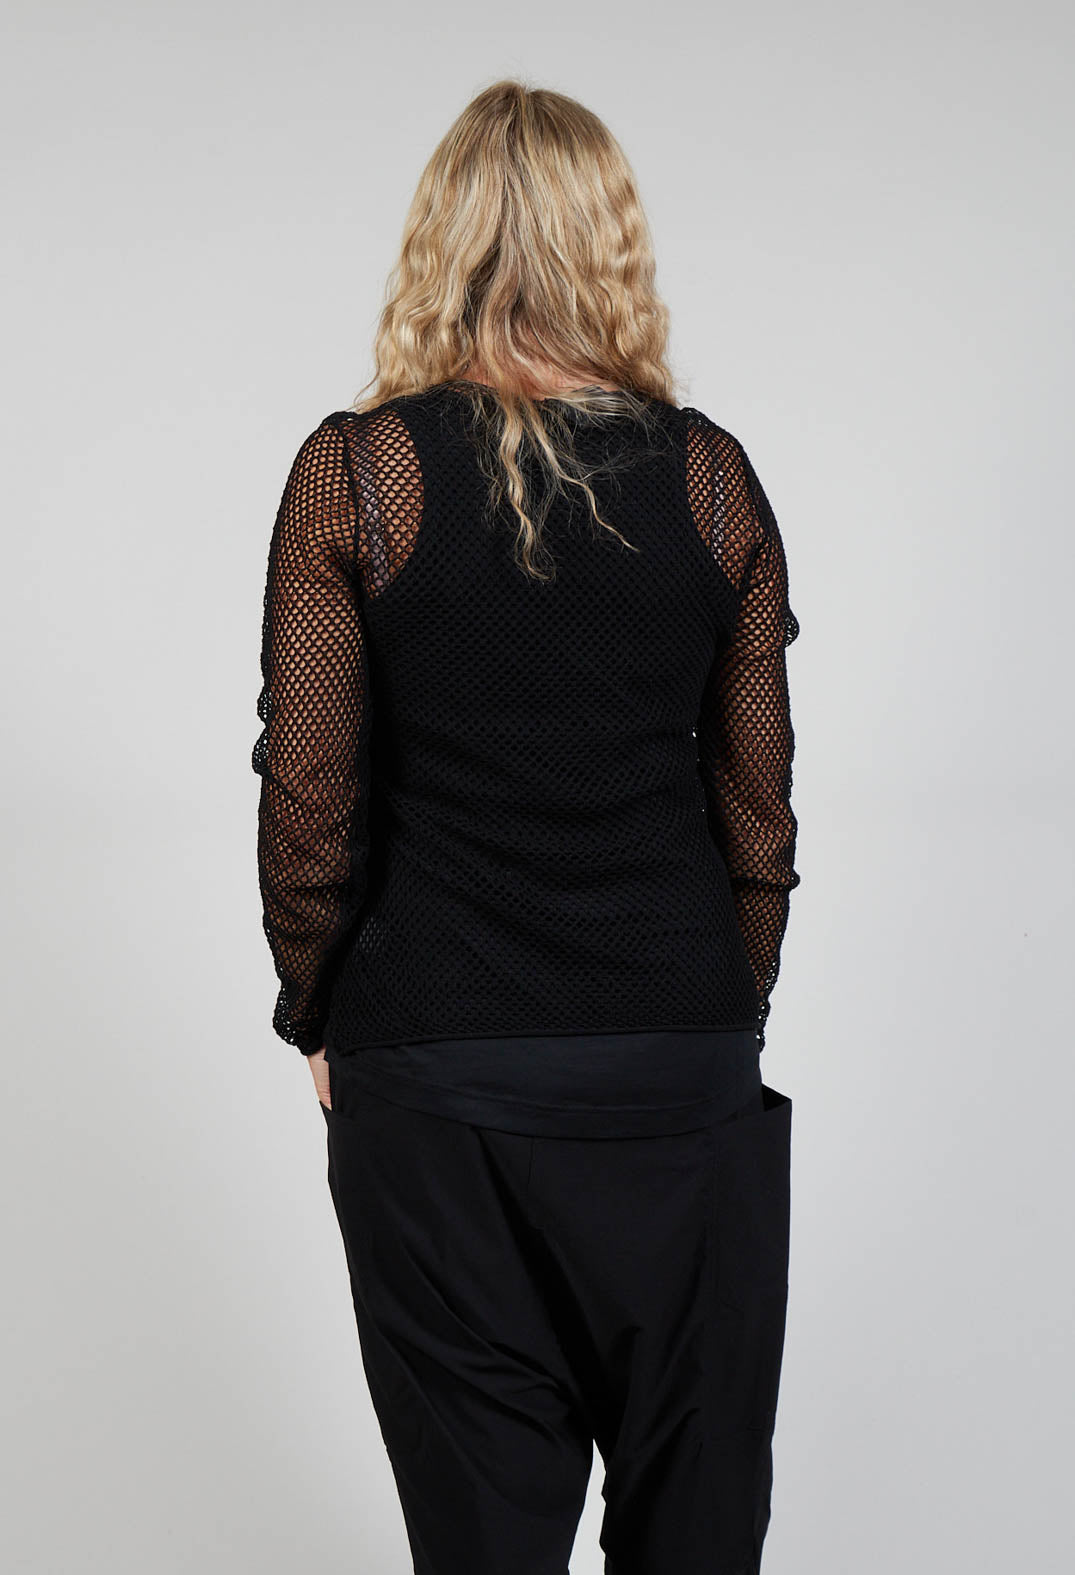 Netted Top in Black